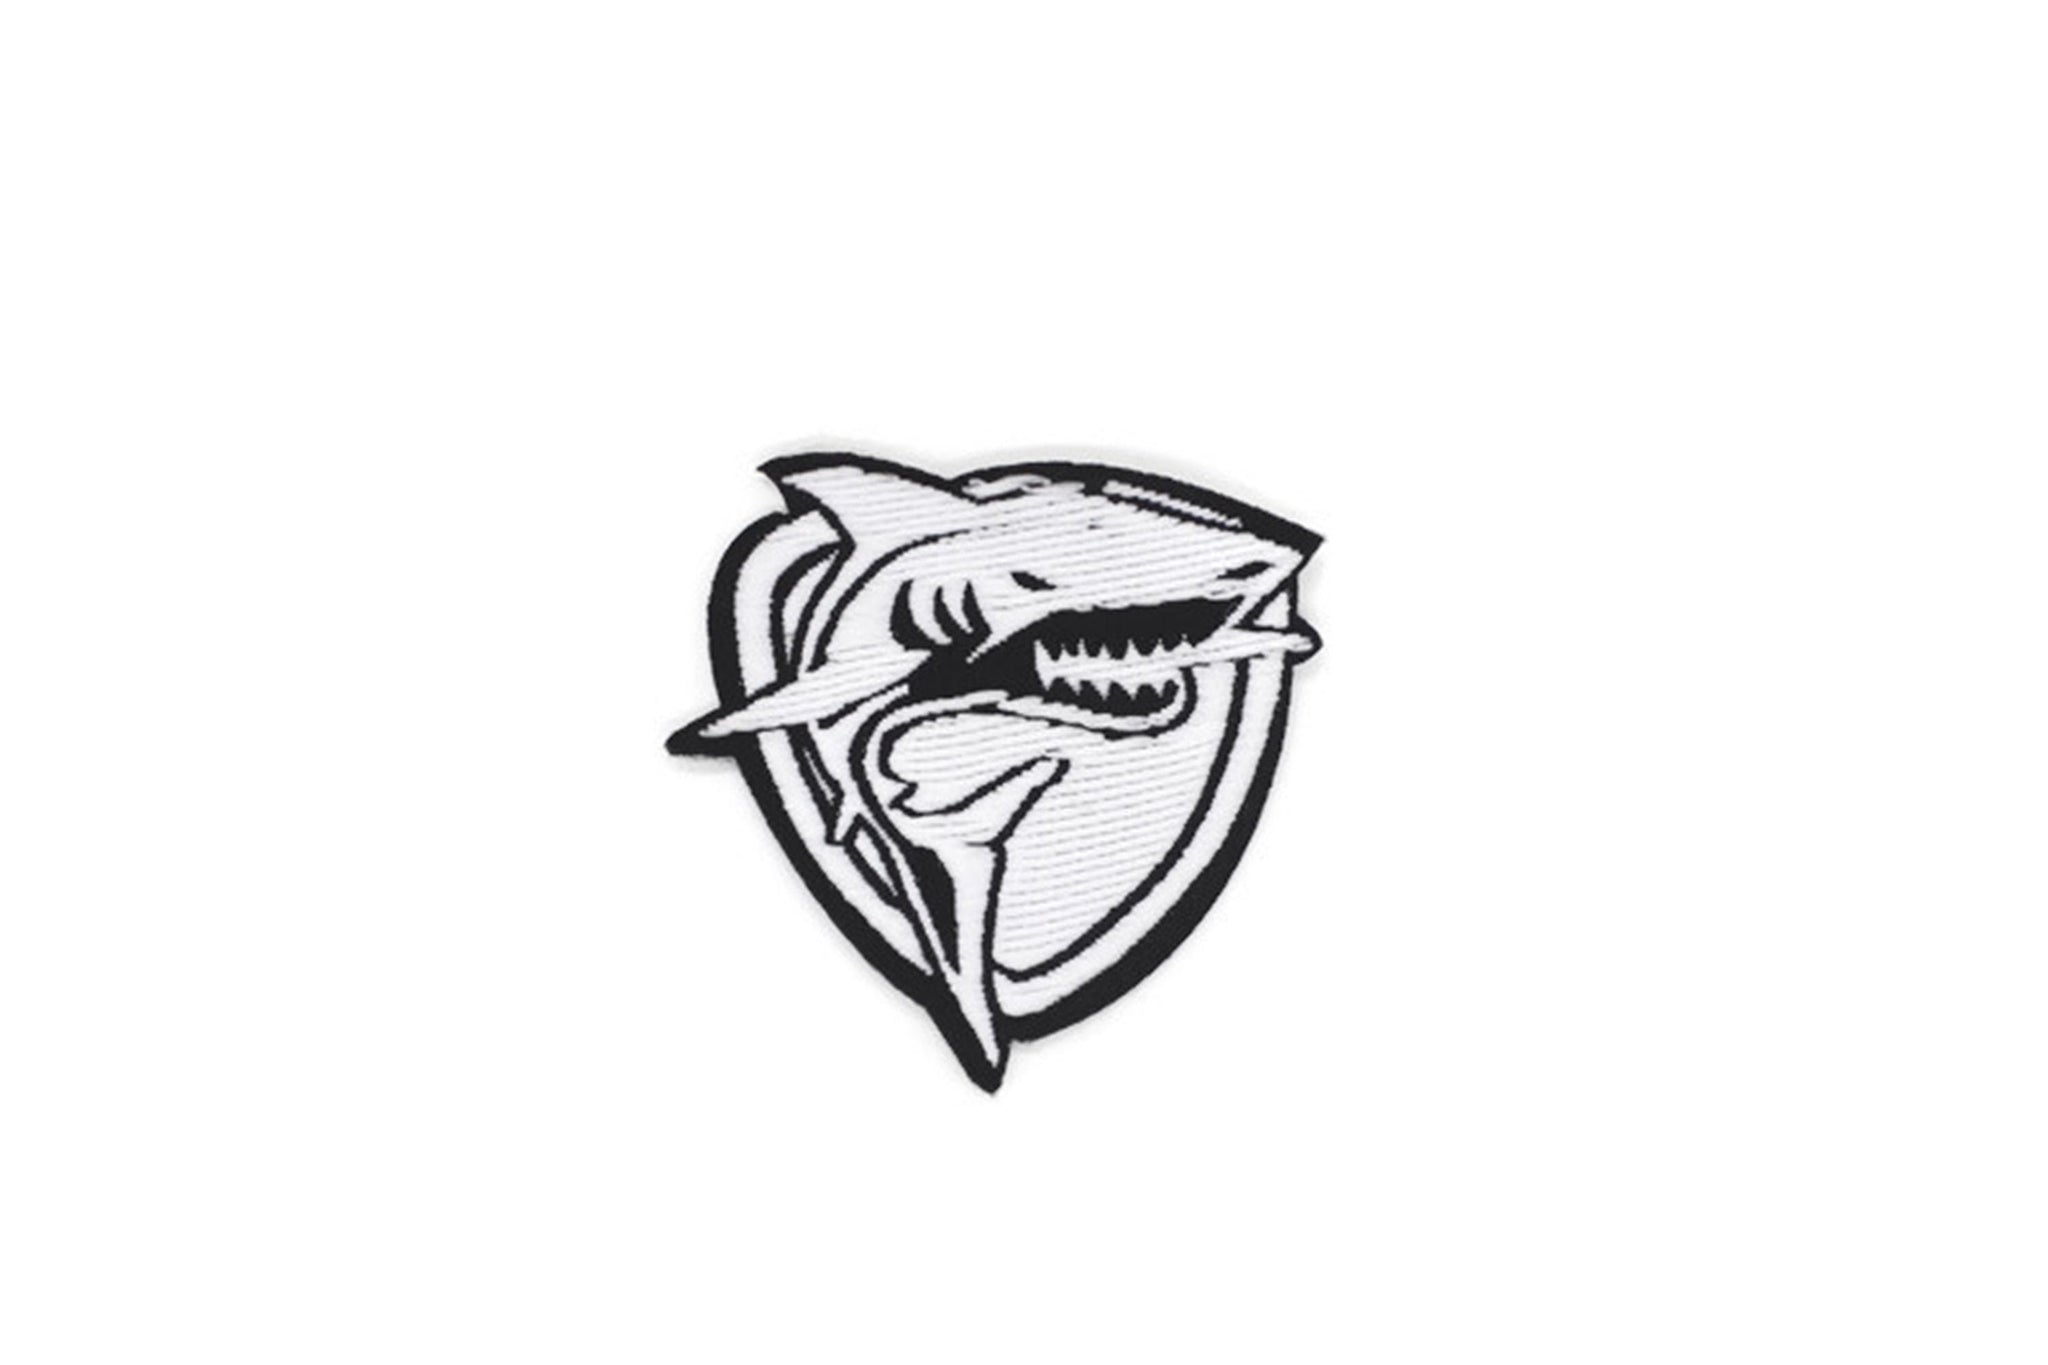 Shark Patch 1.7 Inch Iron On Patch Embroidery, Custom Patch, High Quality Sew On Badge for Denim, Sew On Patch, Applique